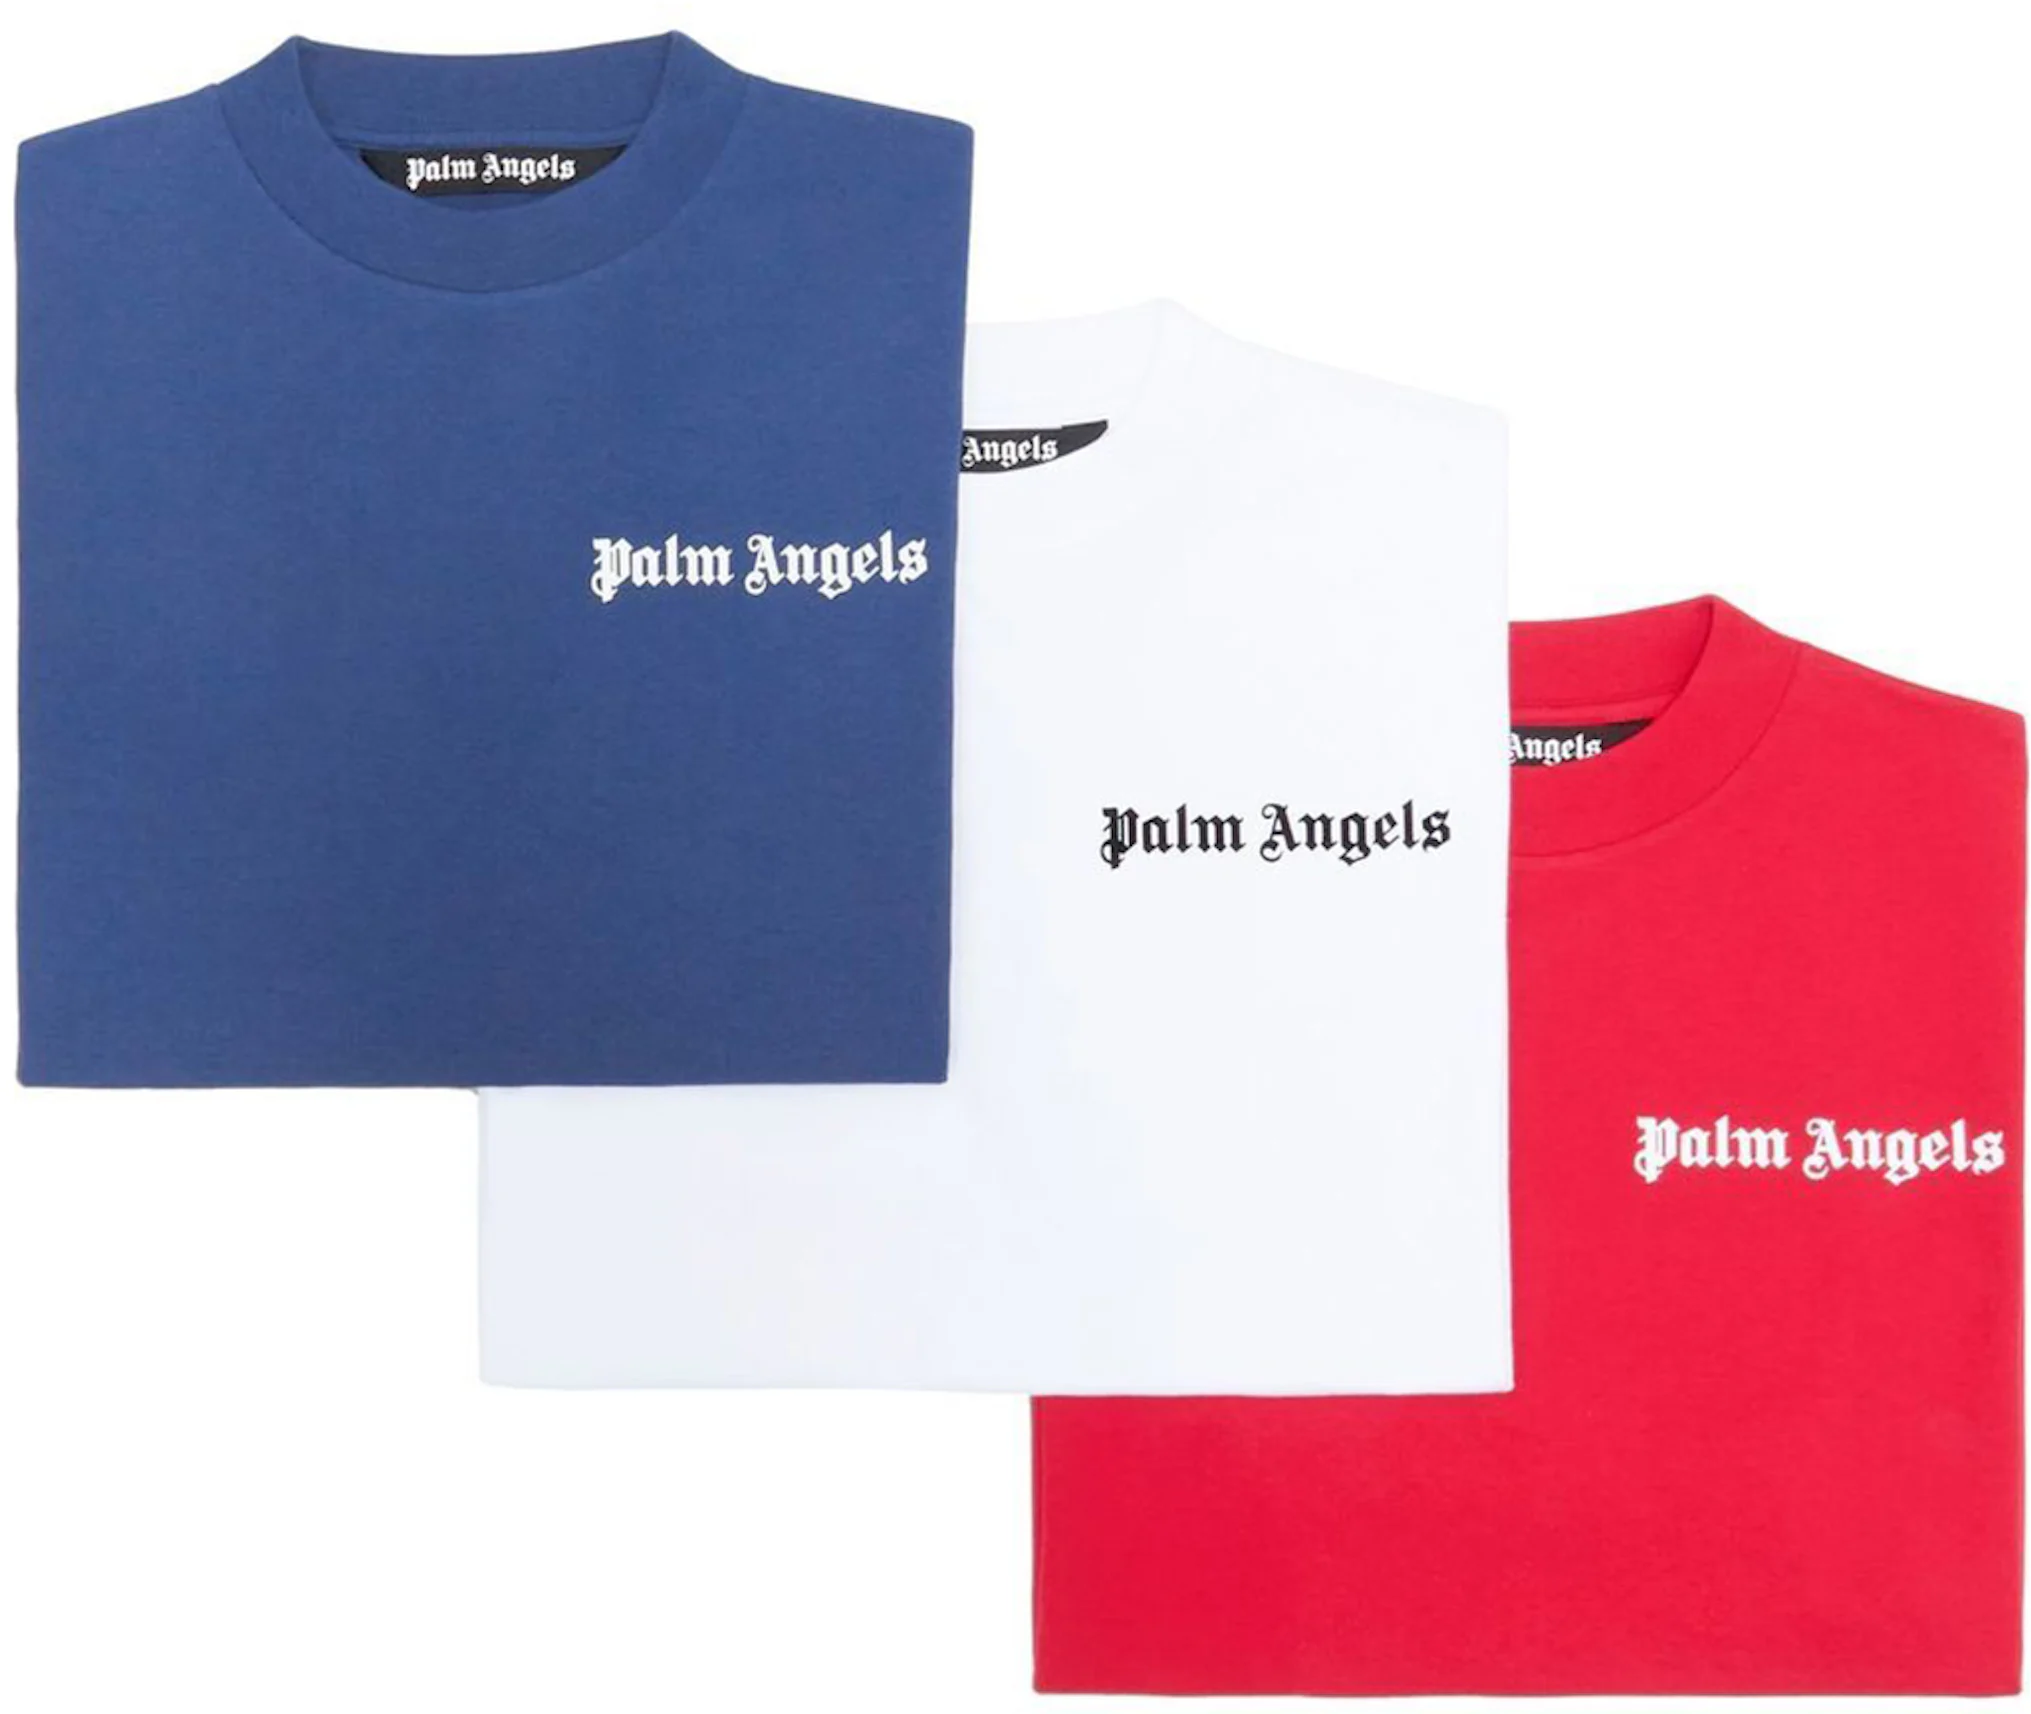 Nude Shades T-shirt Tripack in neutrals - Palm Angels® Official